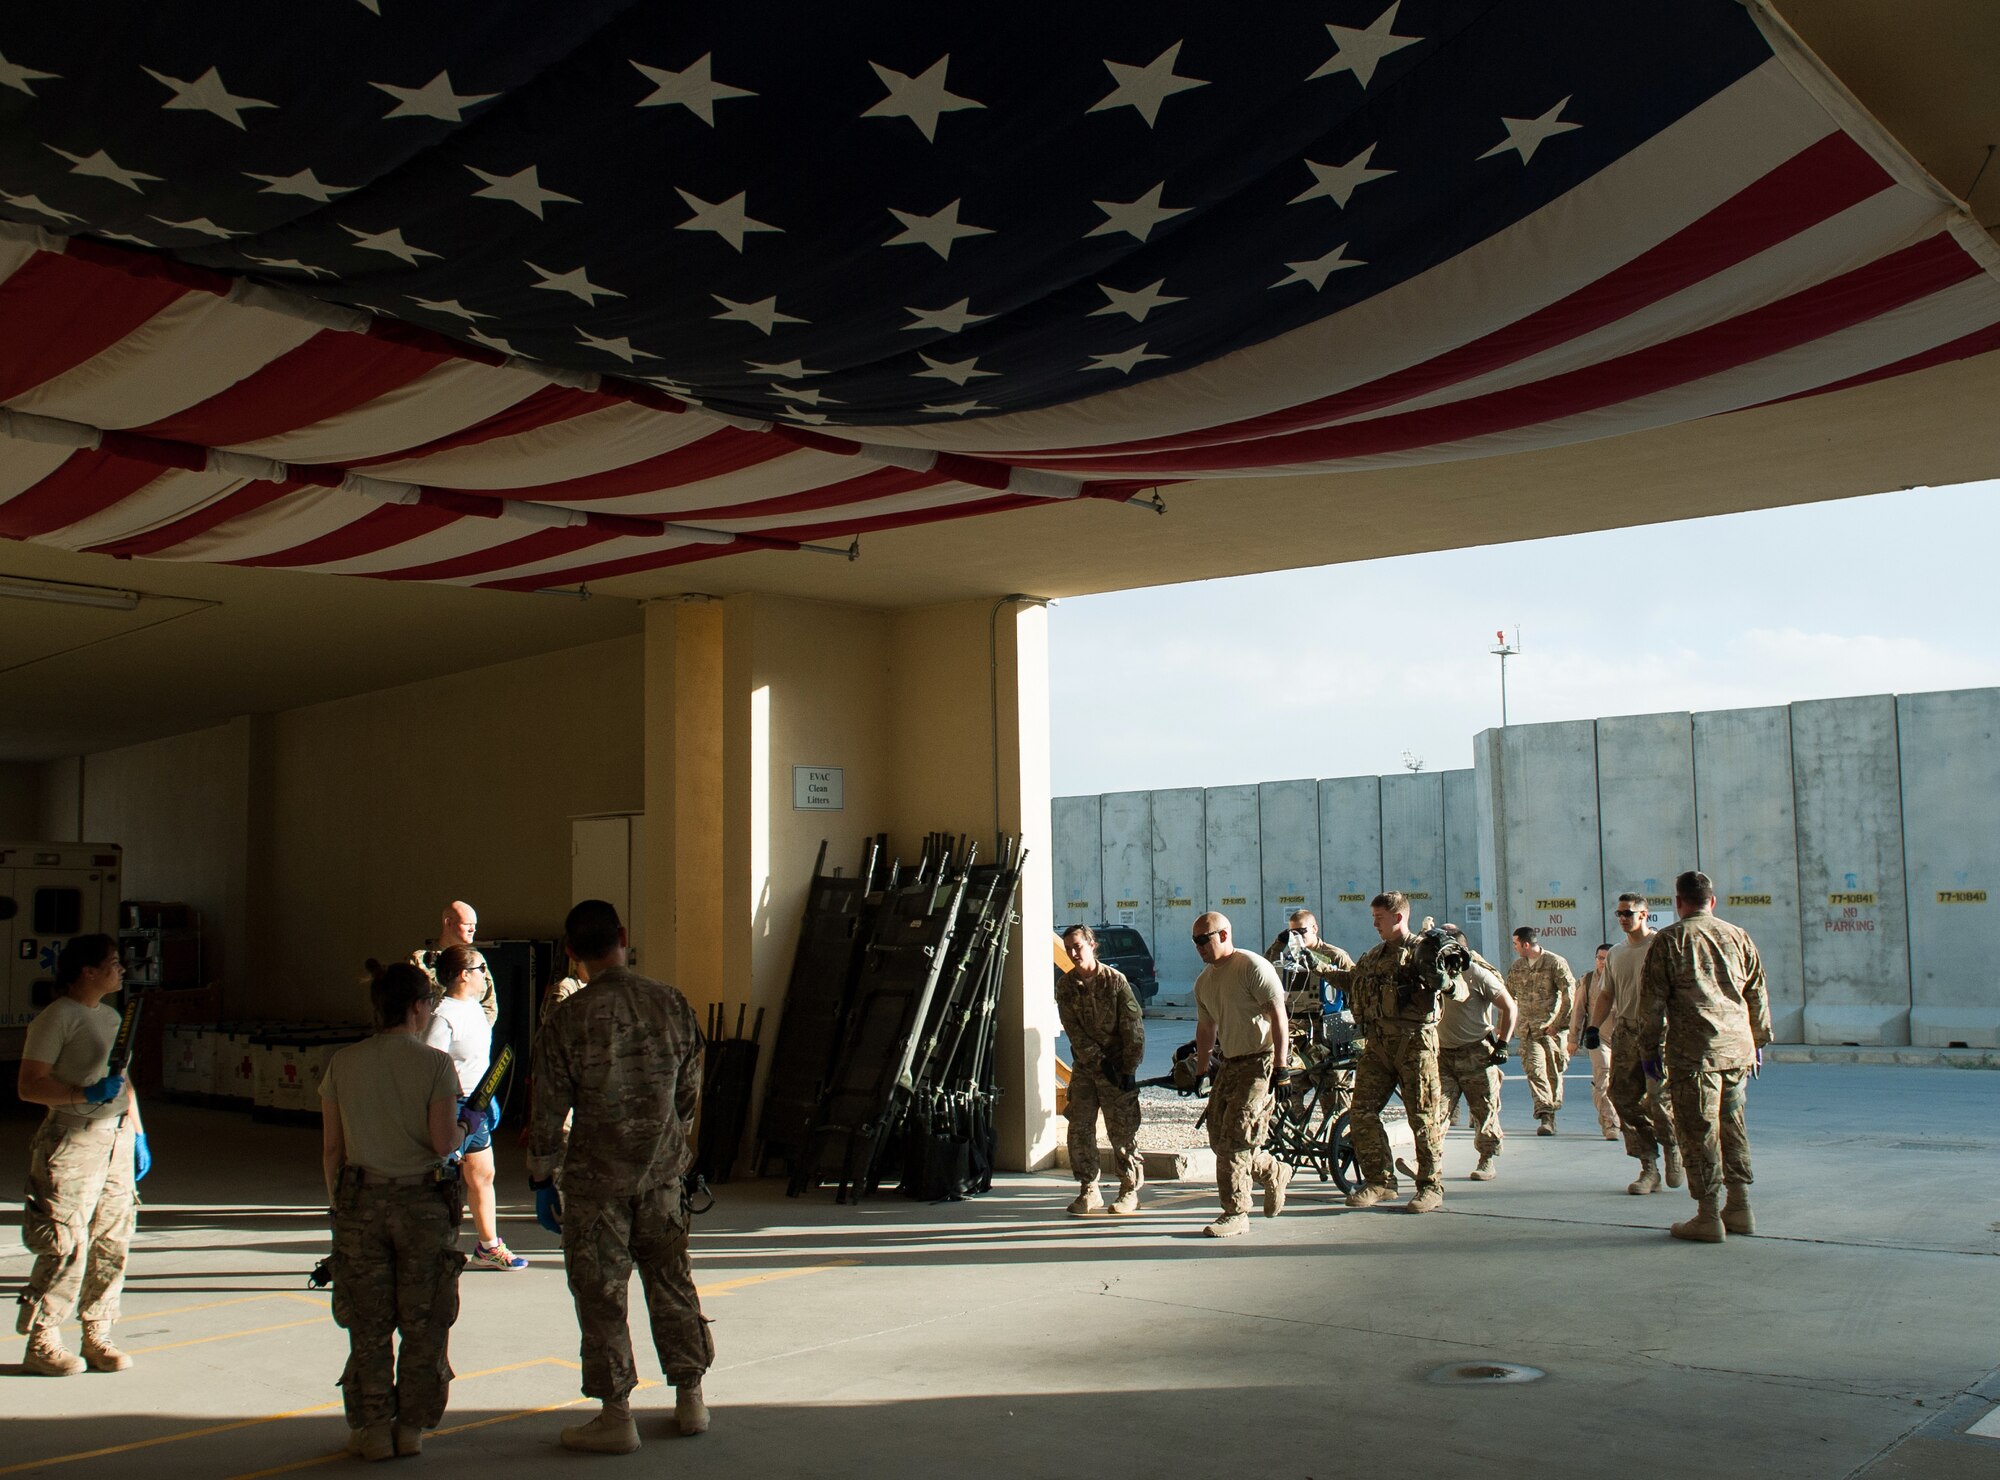 U.S. Airmen and Soldiers transport an injured Afghan National Defense and Security Forces soldier who sustained trauma from a gunshot to the Craig Joint Theater Hospital for surgery at Bagram Air Field, Afghanistan, Sept. 26, 2015. The CJTH provides surgical capabilities in trauma, general surgery, orthopedics, neurosurgery, urology, vascular surgery and otolaryngology, all of which are critical to helping 98 percent of patients who come to the hospital survive their injuries. (U.S. Air Force photo by Tech. Sgt. Joseph Swafford/Released)